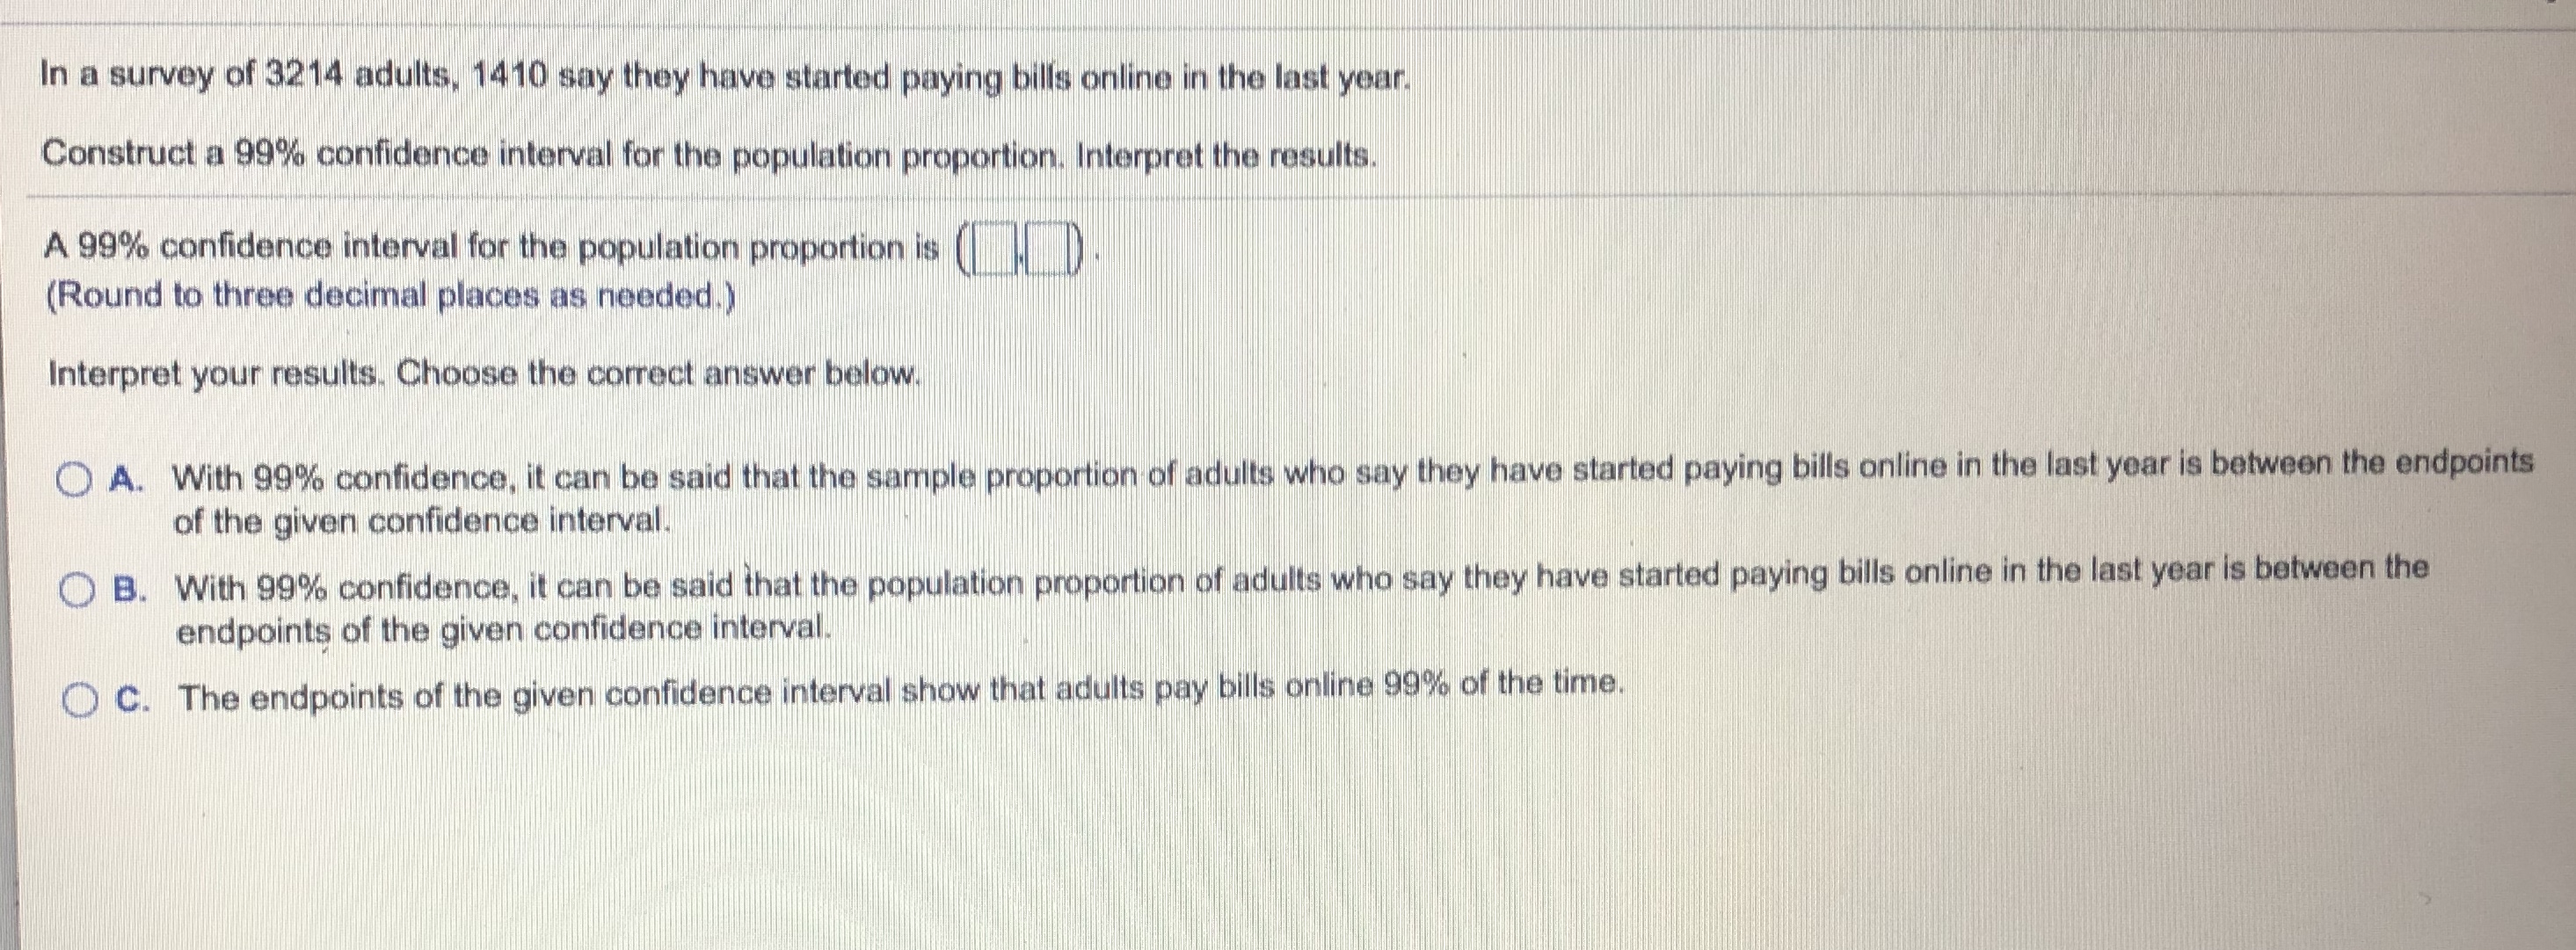 In a survey of 3214 adults, 1410 say they have started paying bills online in the last year.
Construct a 99% confidence interval for the population proportion. Interpret the results.
A 99% confidence interval for the population proportion is (
(Round to three decimal places as needed.)
Interpret your results. Choose the correct answer below.
O A. With 99% confidence, it can be said that the sample proportion of adults who say they have started paying bills online in the last year is between the endpoints
of the given confidence interval.
O B.
With 99% confidence, it can be said that the population proportion of adults who say they have started paying bills online in the last year is between the
endpoints of the given confidence interval.
C. The endpoints of the given confidence interval show that adults pay bills online 99% of the time.
